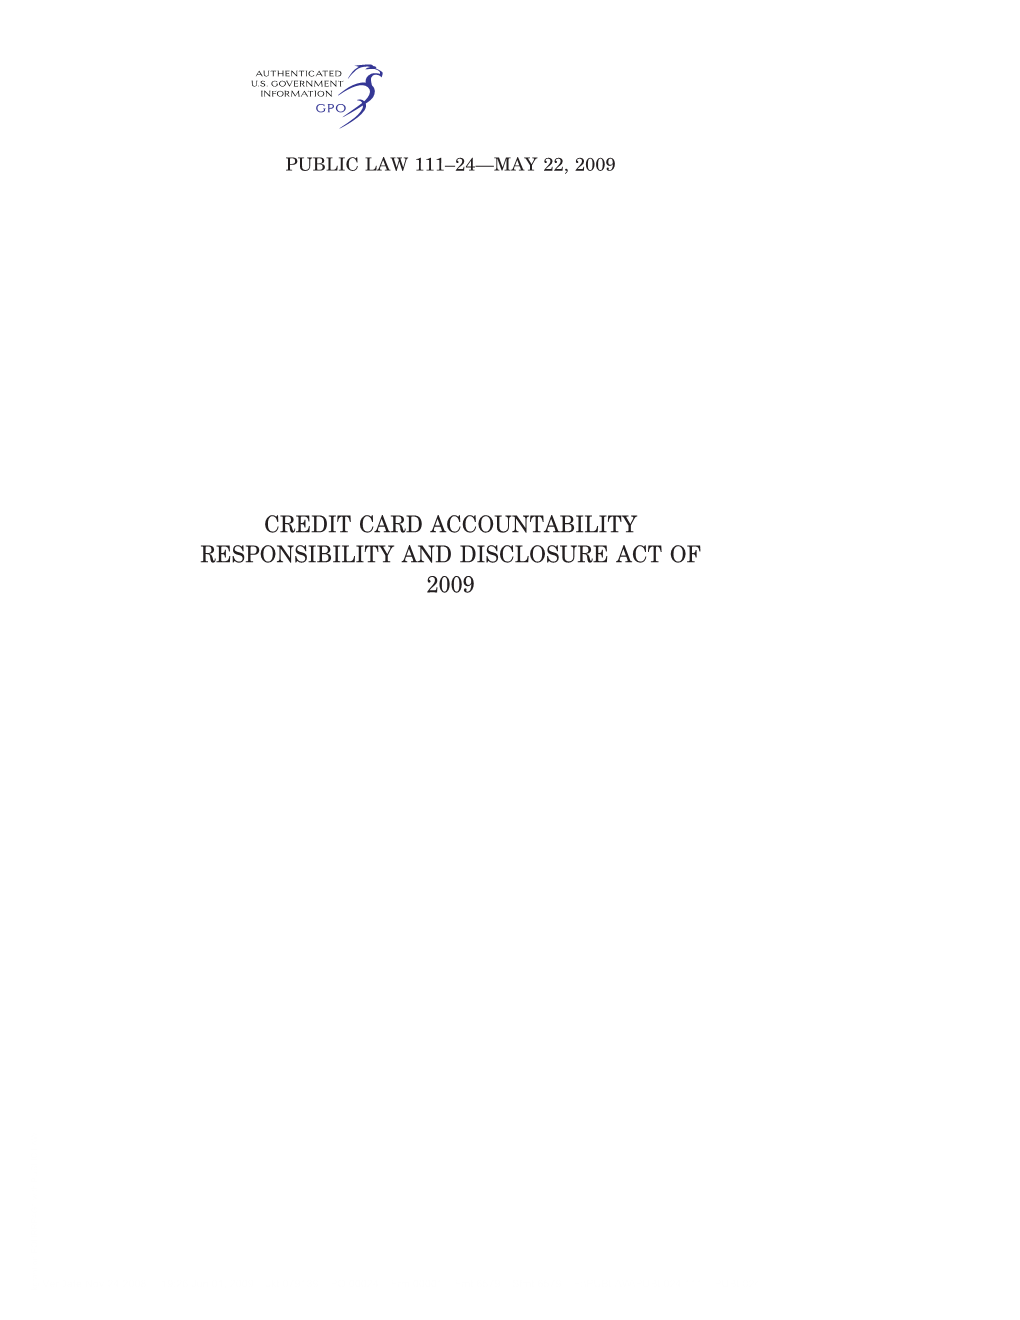 Credit Card Accountability Responsibility and Disclosure Act of 2009